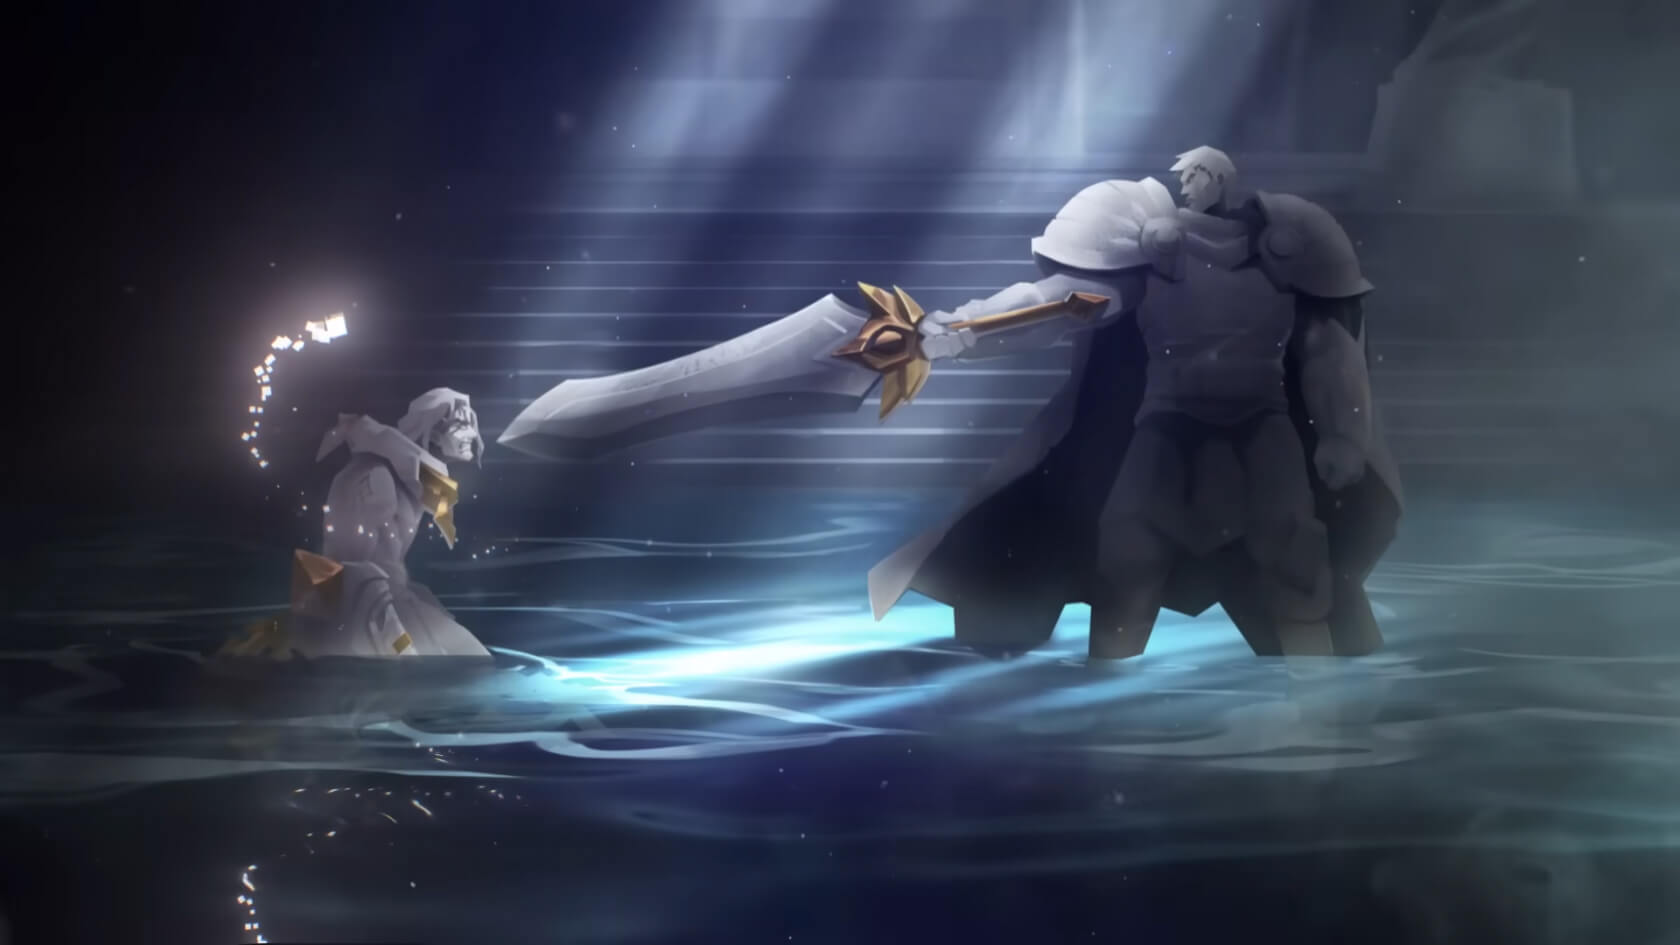 A gloomy scene depicting Garen and Sylas as petricite statues in a flooding Demacia with Garen pointing his sword directly at Sylas